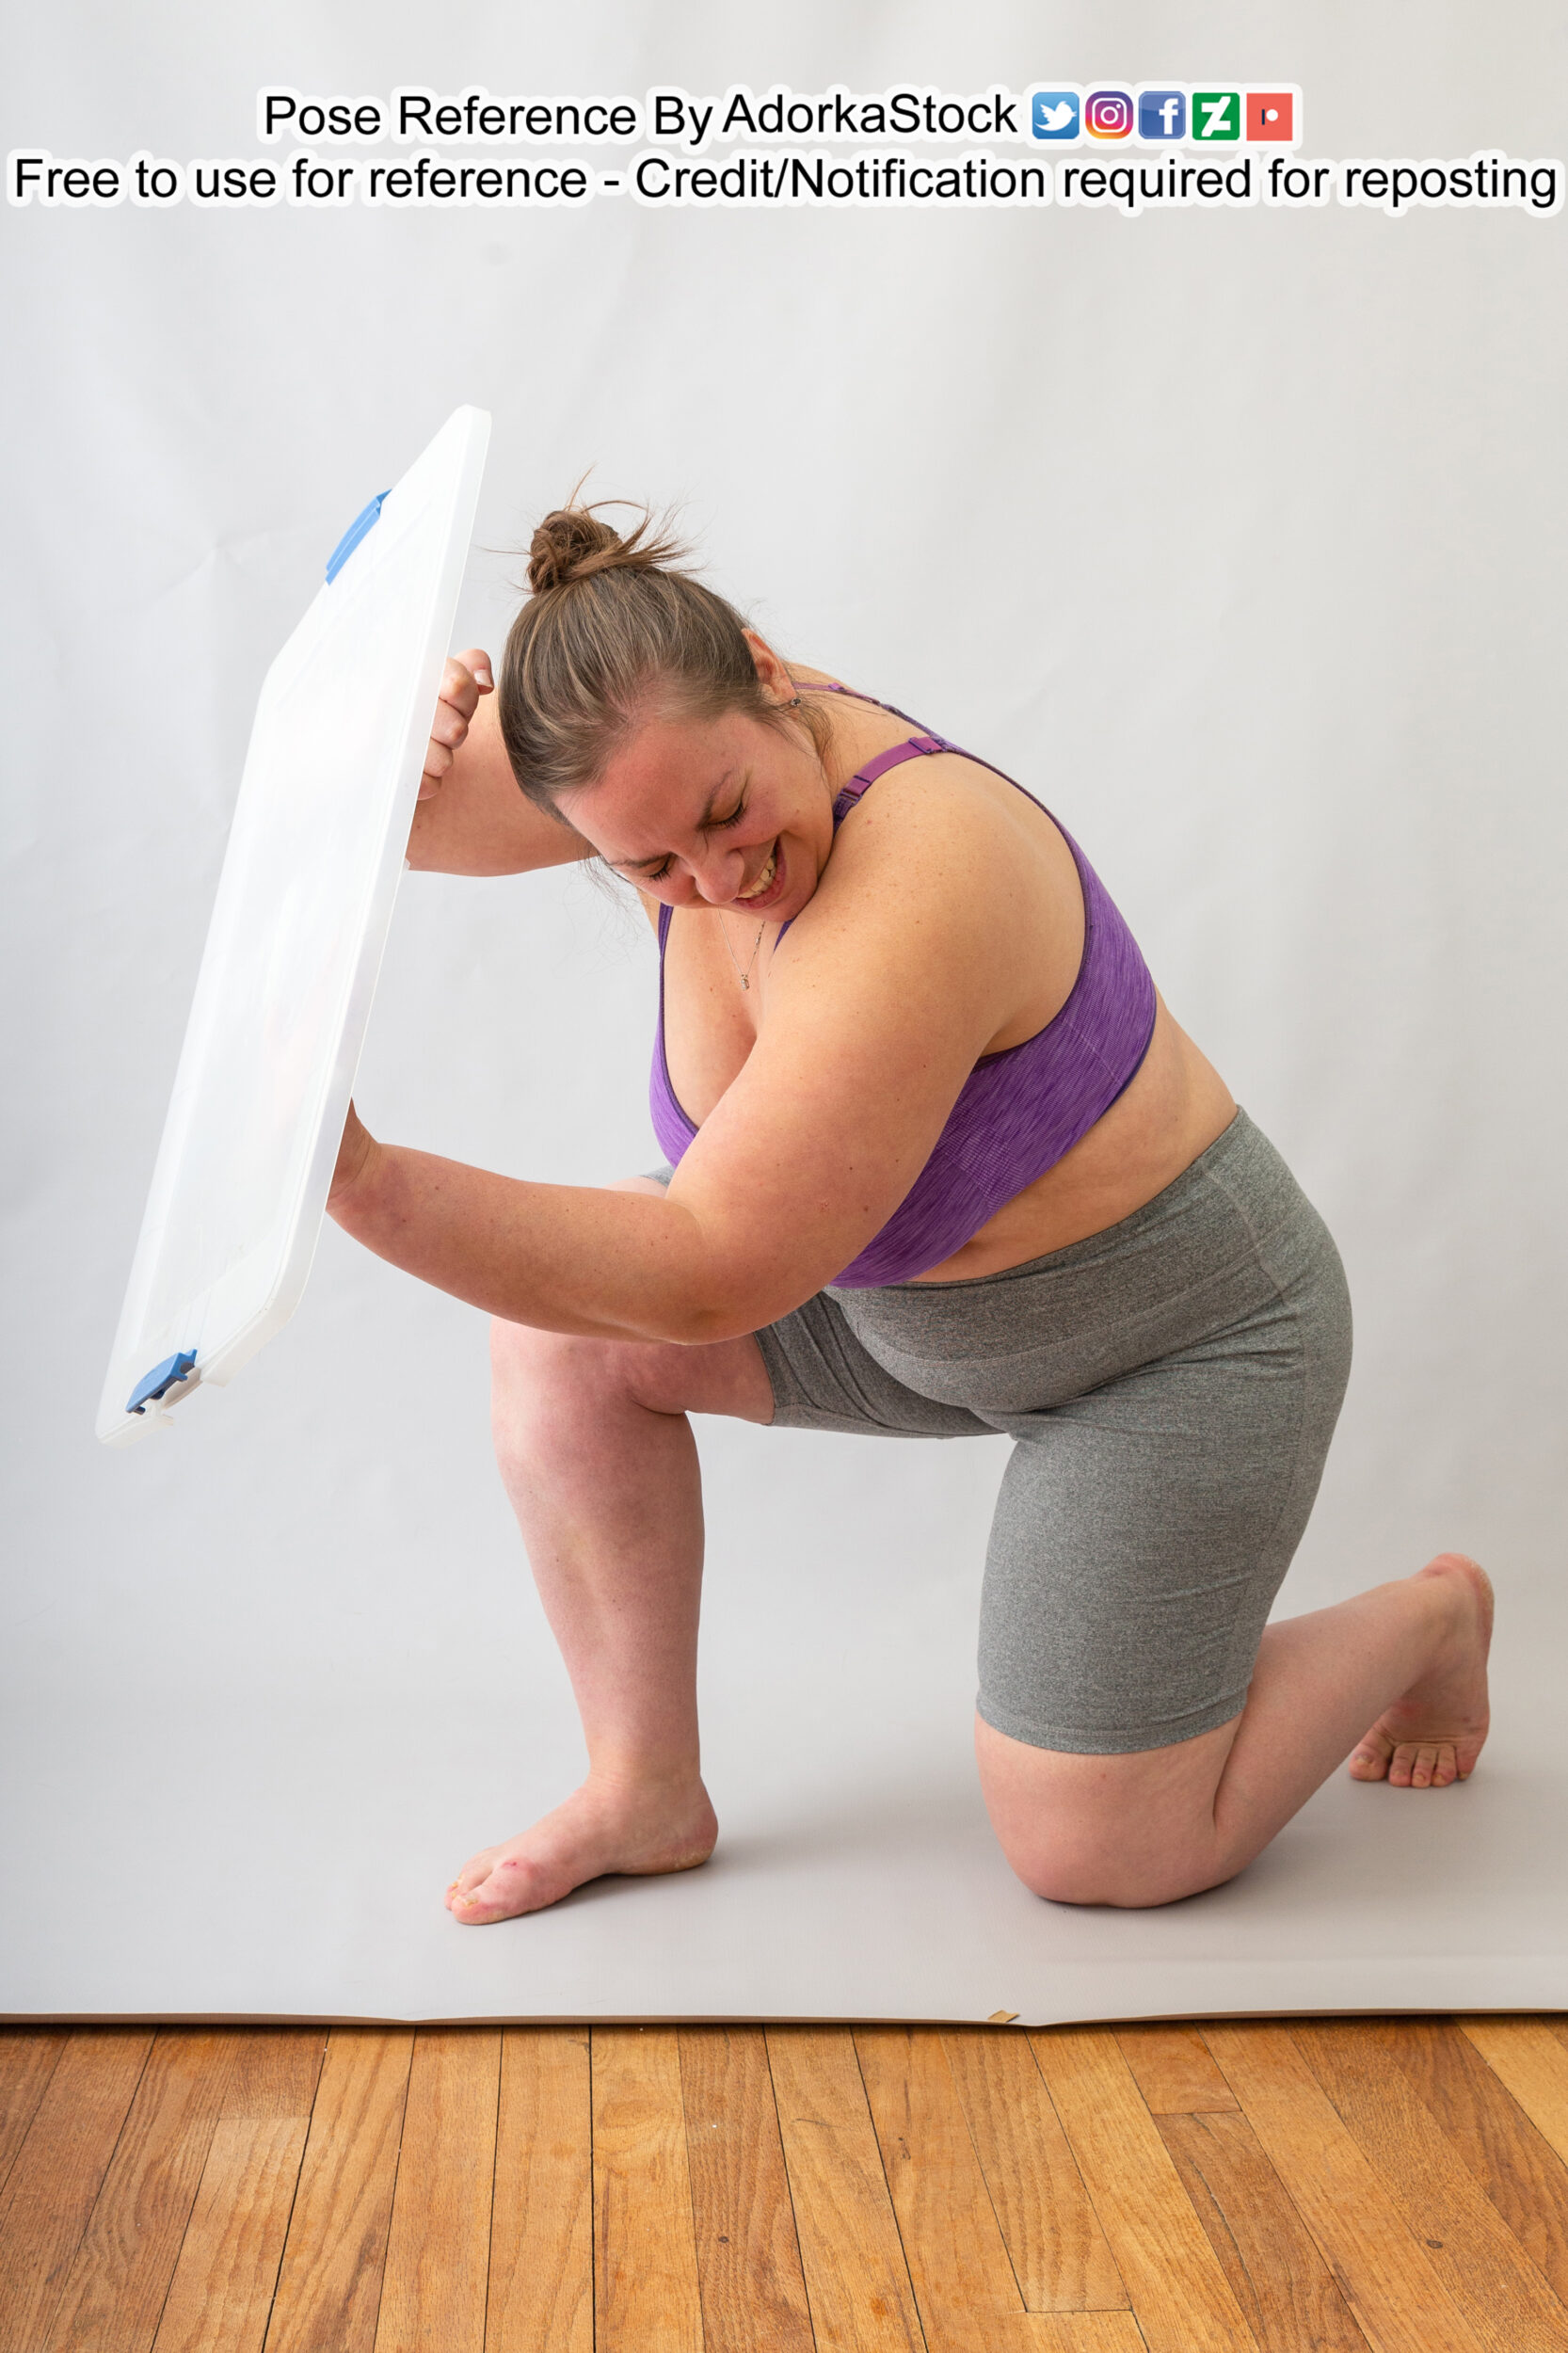 Fat female pose reference model kneeling on one knee behind shield